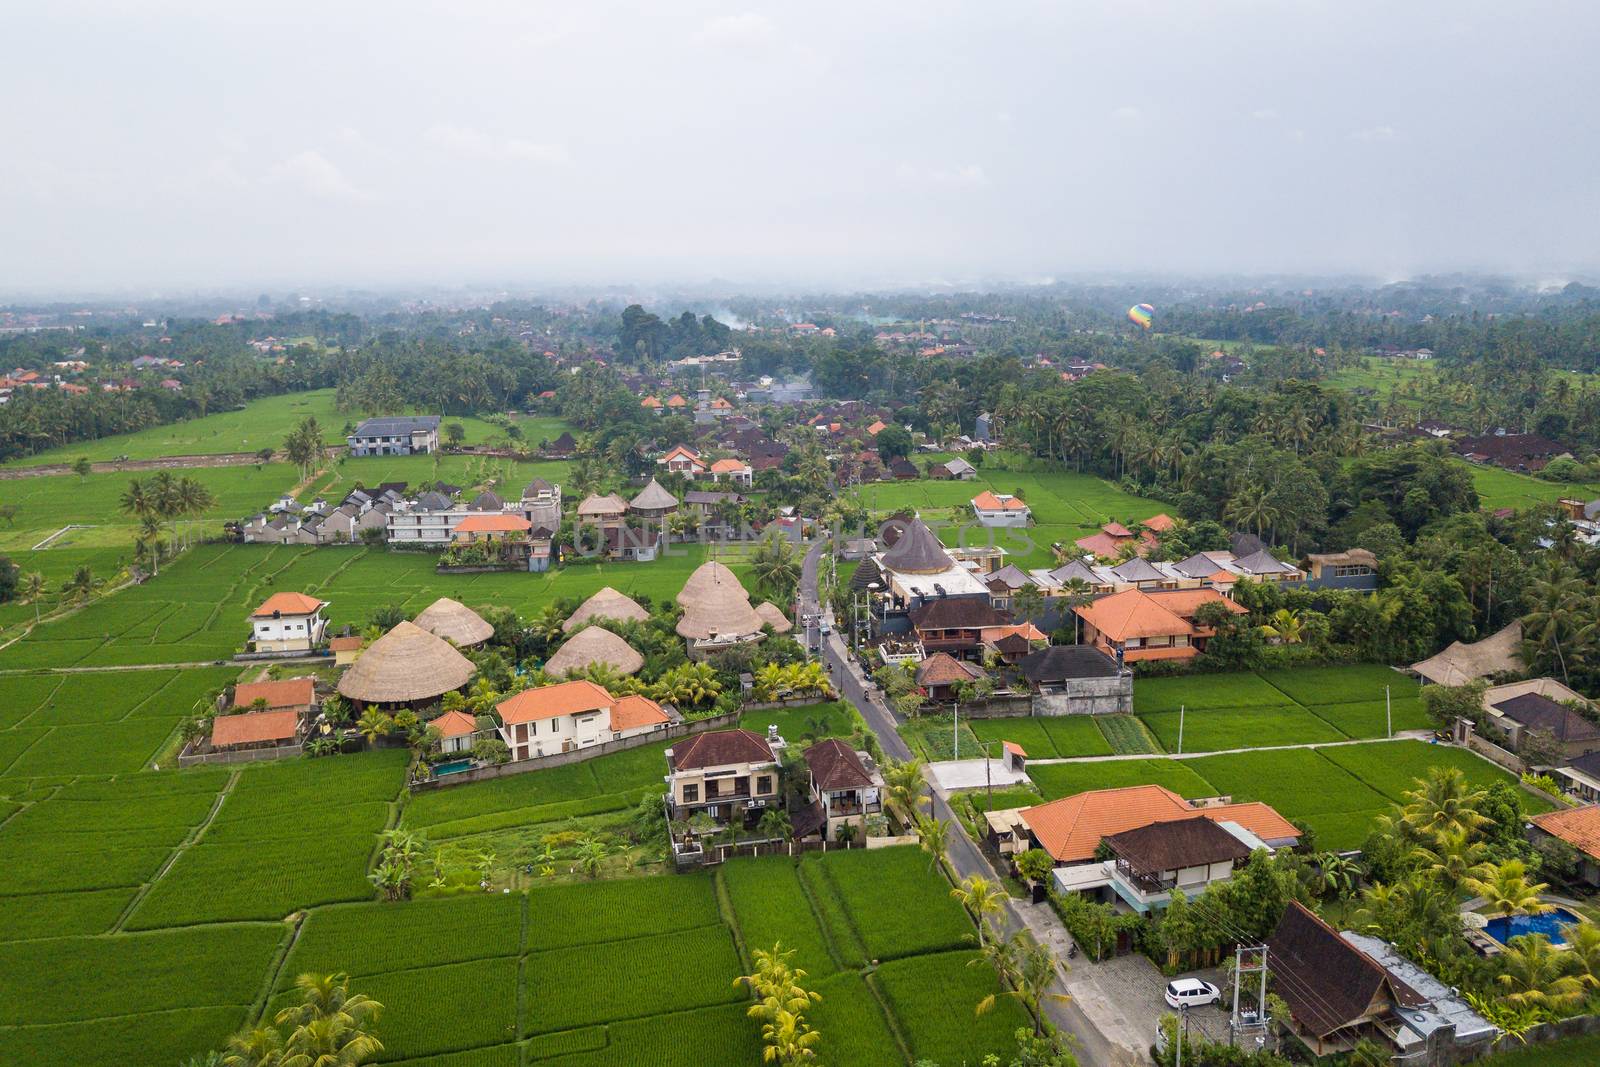 Aerial view of Ubud countryside in Bali, Indonesia